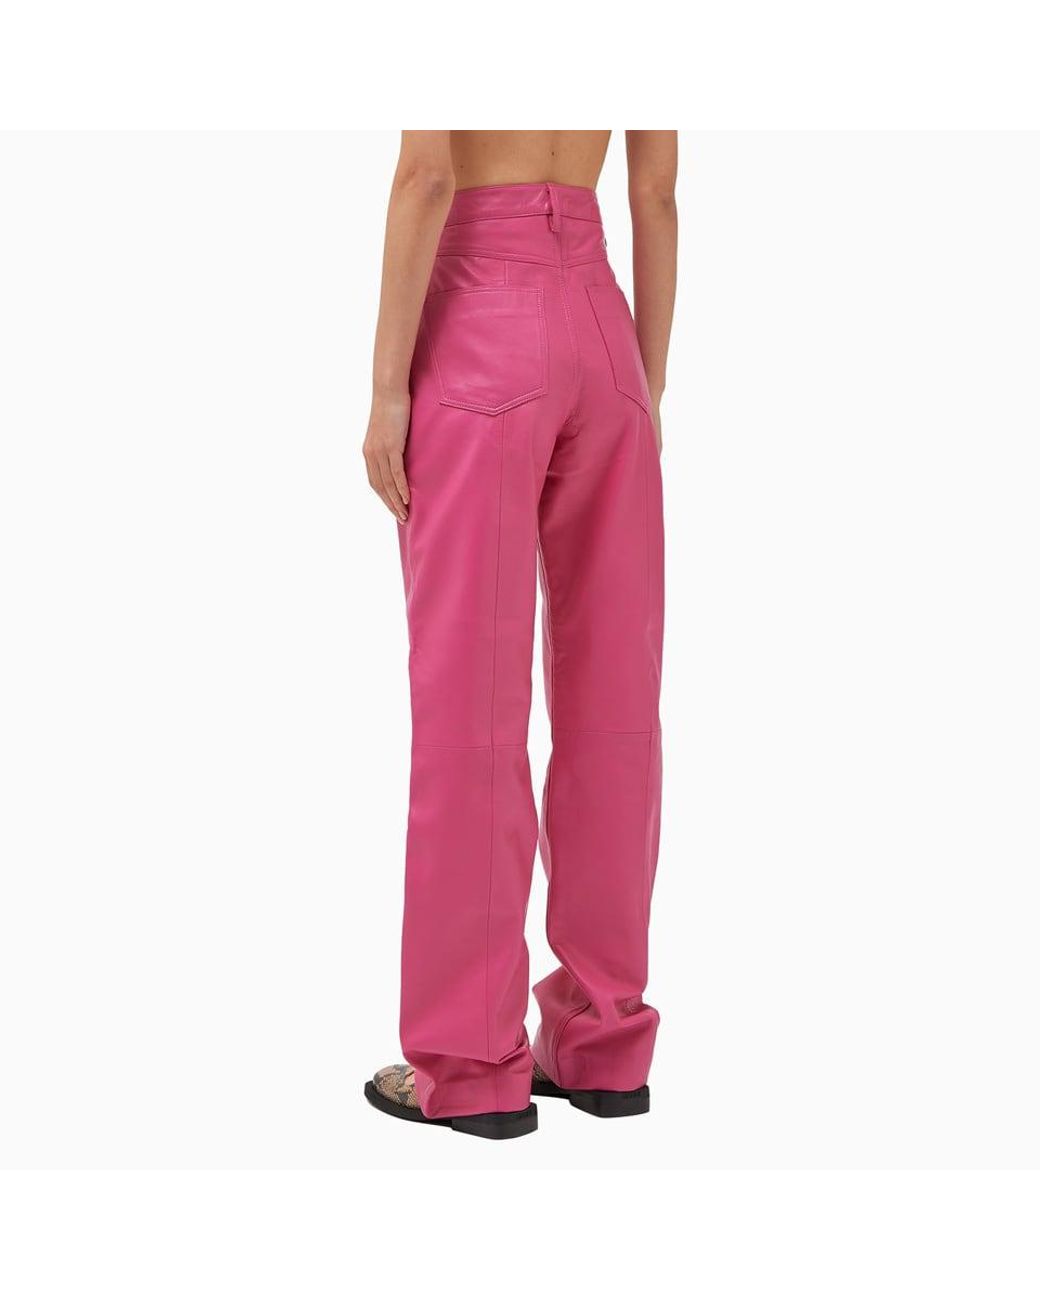 REMAIN Birger Christensen Remain Lynn Leather Pants in Pink | Lyst